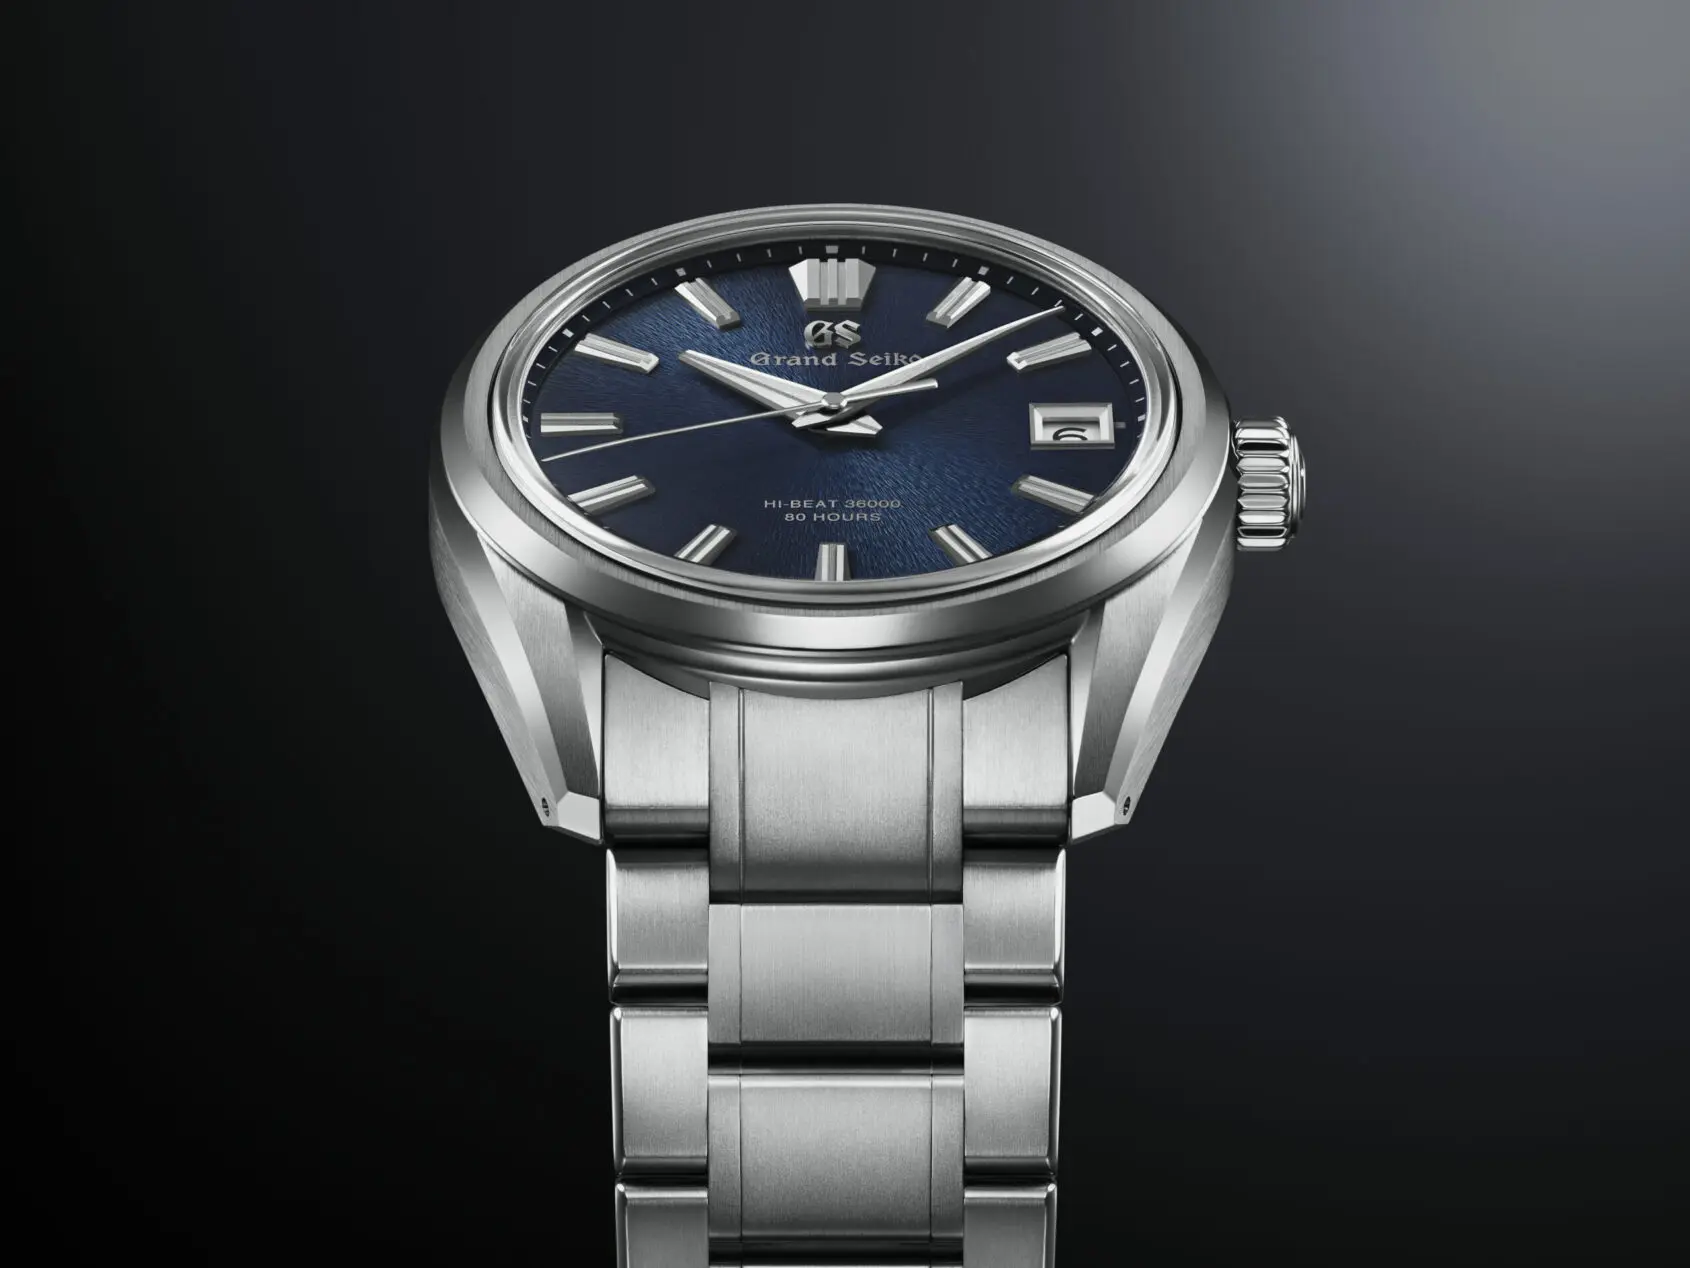 The Grand Seiko SLGH019 proves it is time to move on from Birch dials